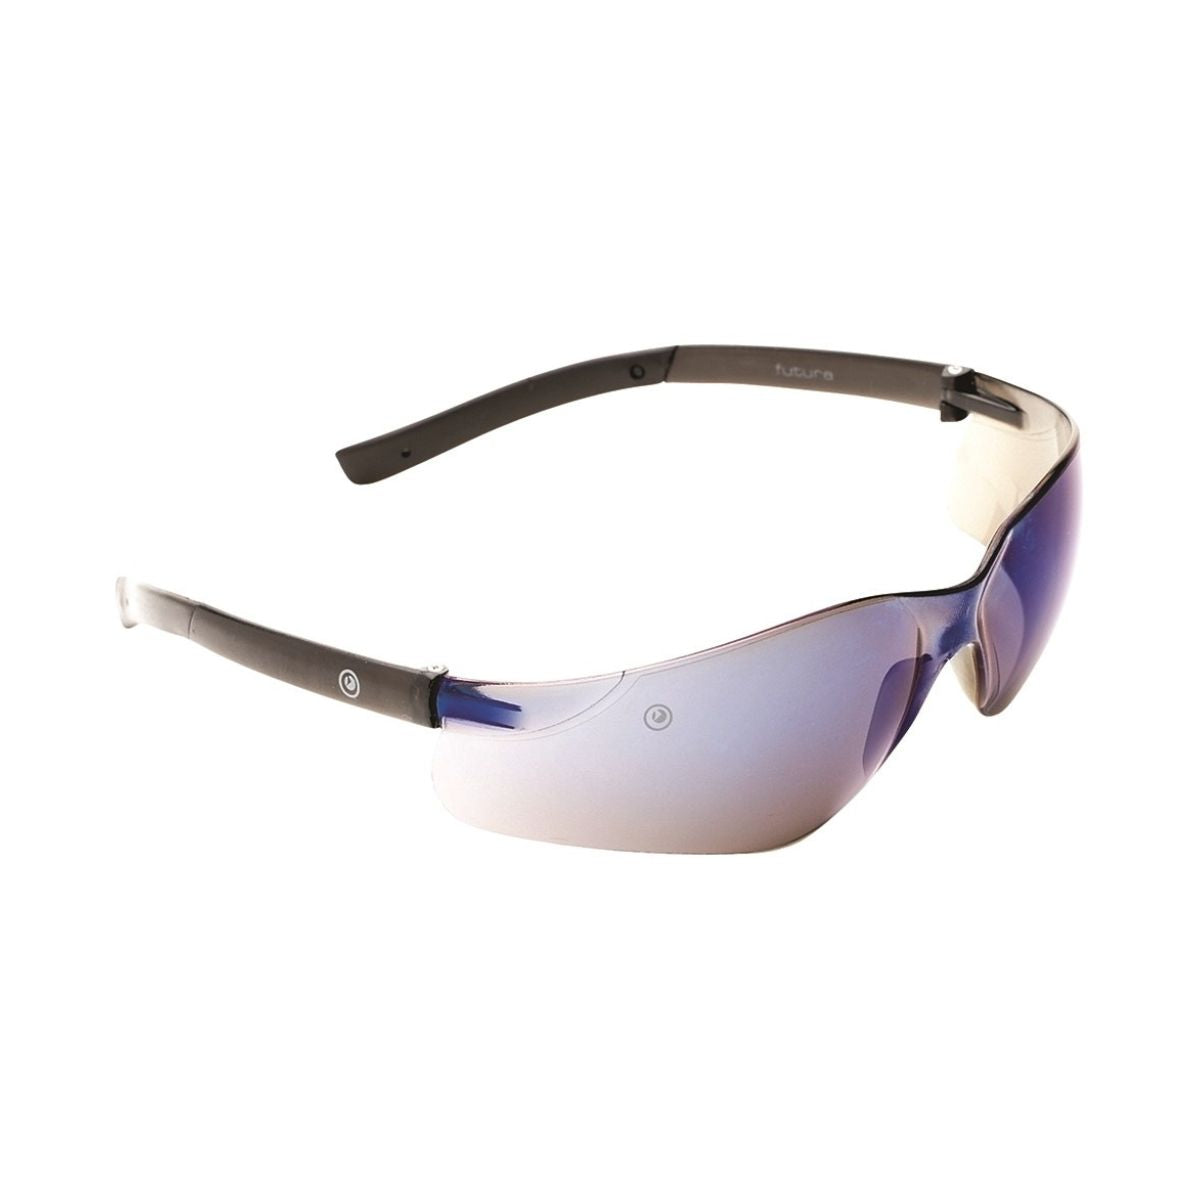 Futura Safety Glasses Blue Mirror Lens 9003 (Pack of 12)